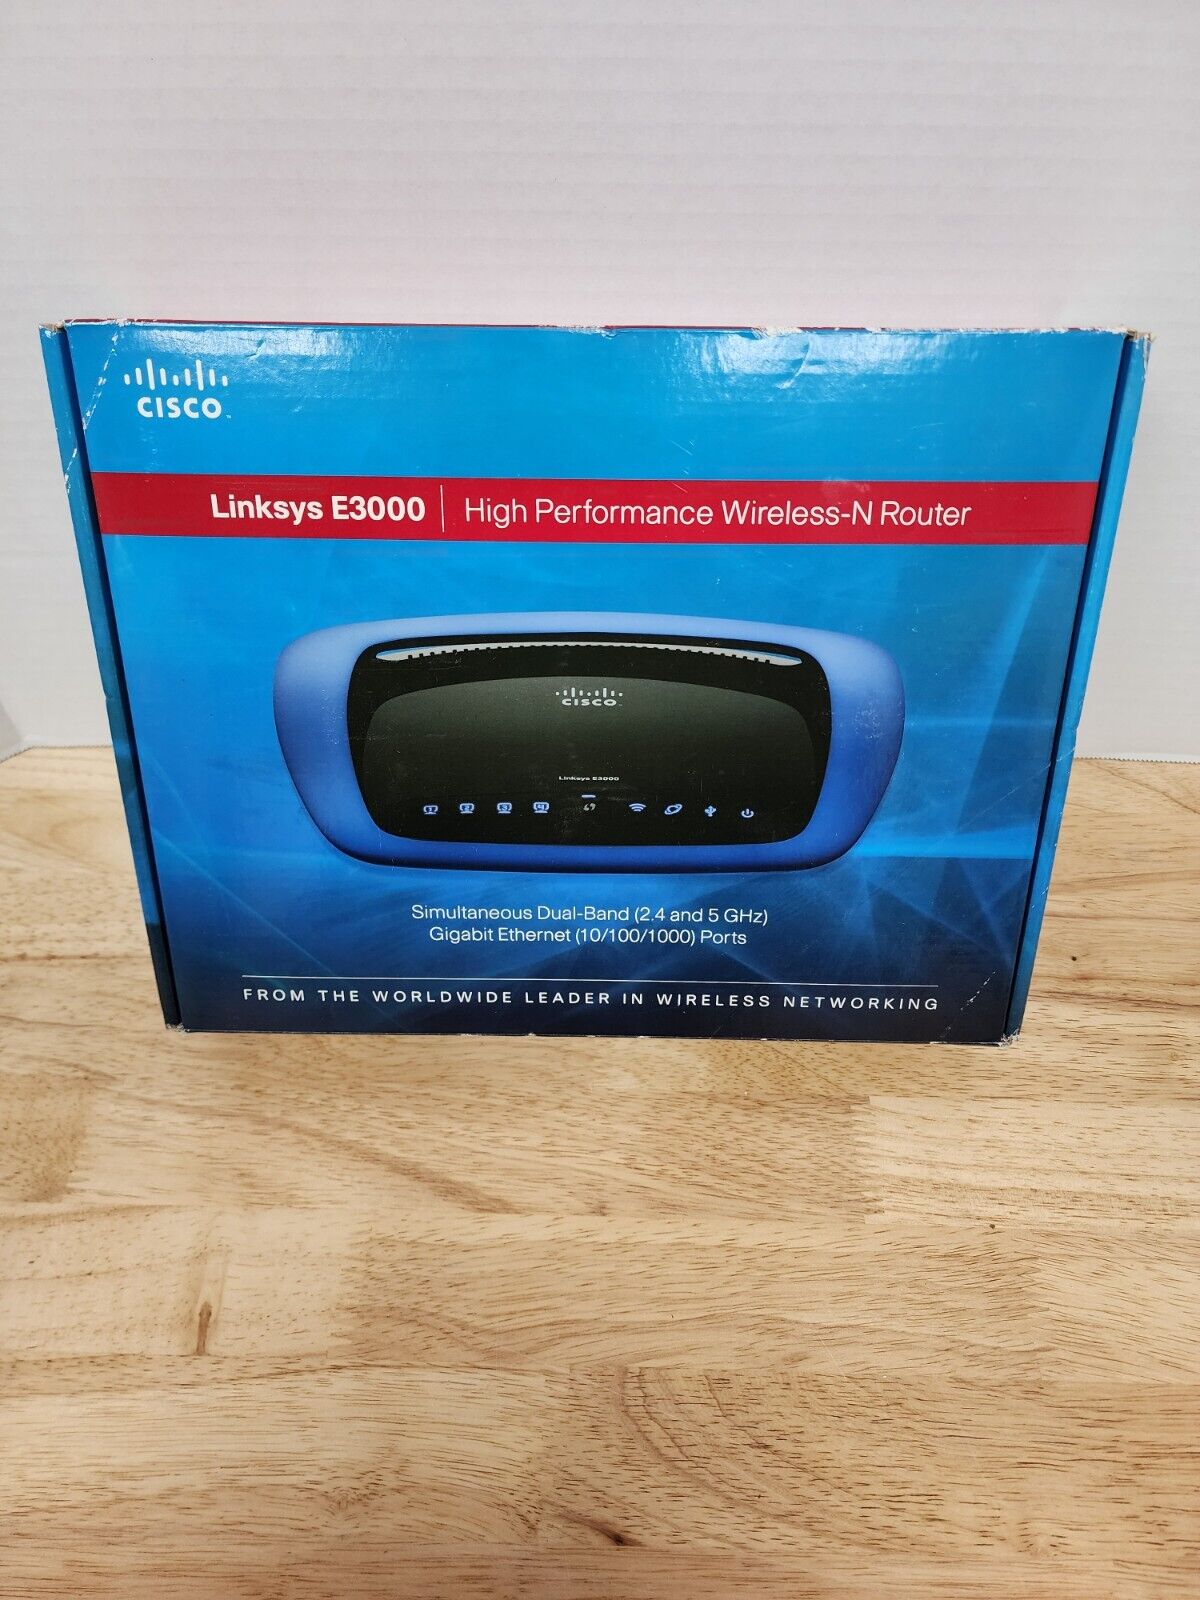 Cisco Linksys E3000 High Performance Wireless-N Router -In Box B2